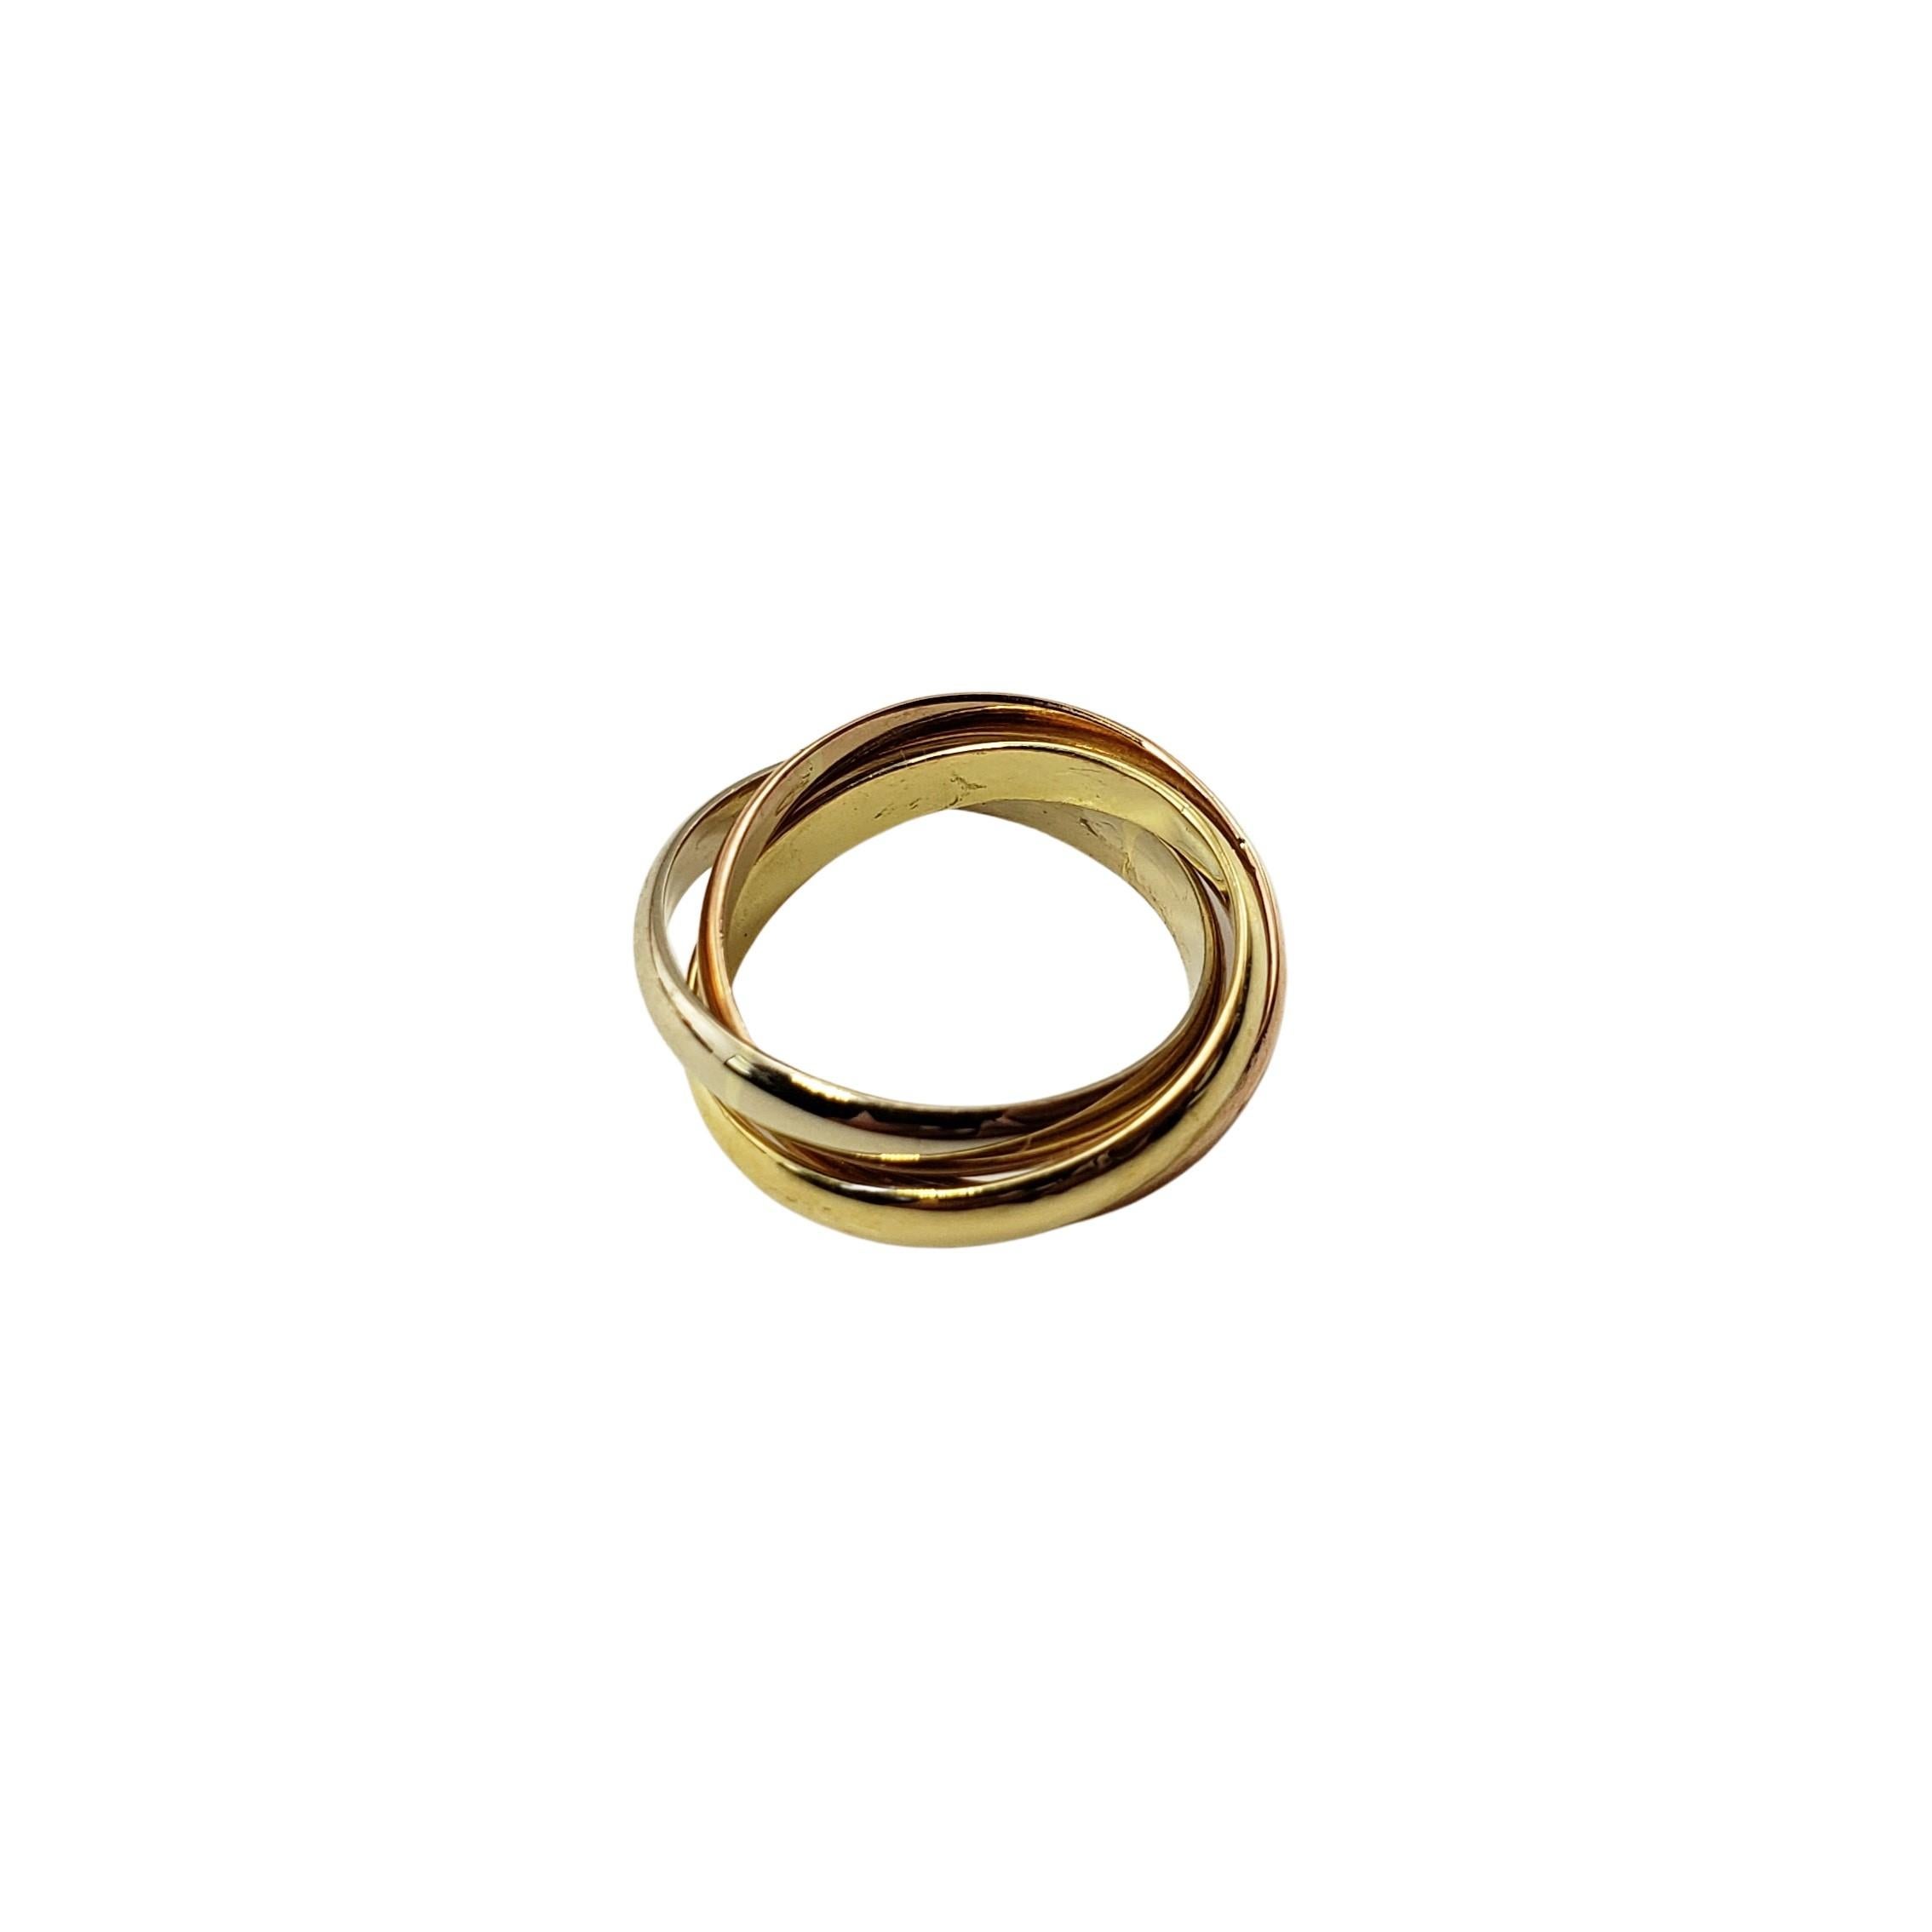 18 Karat Tricolor Rolling Ring Size 4-

This classic rolling ring features a trio of connected bands crafted in 18K yellow, white and rose gold.  Width of each band:  2.5 mm.

Ring Size: 4

Weight:  2.8 dwt. /  4.5 gr.

Stamped: 160  AR

Very good